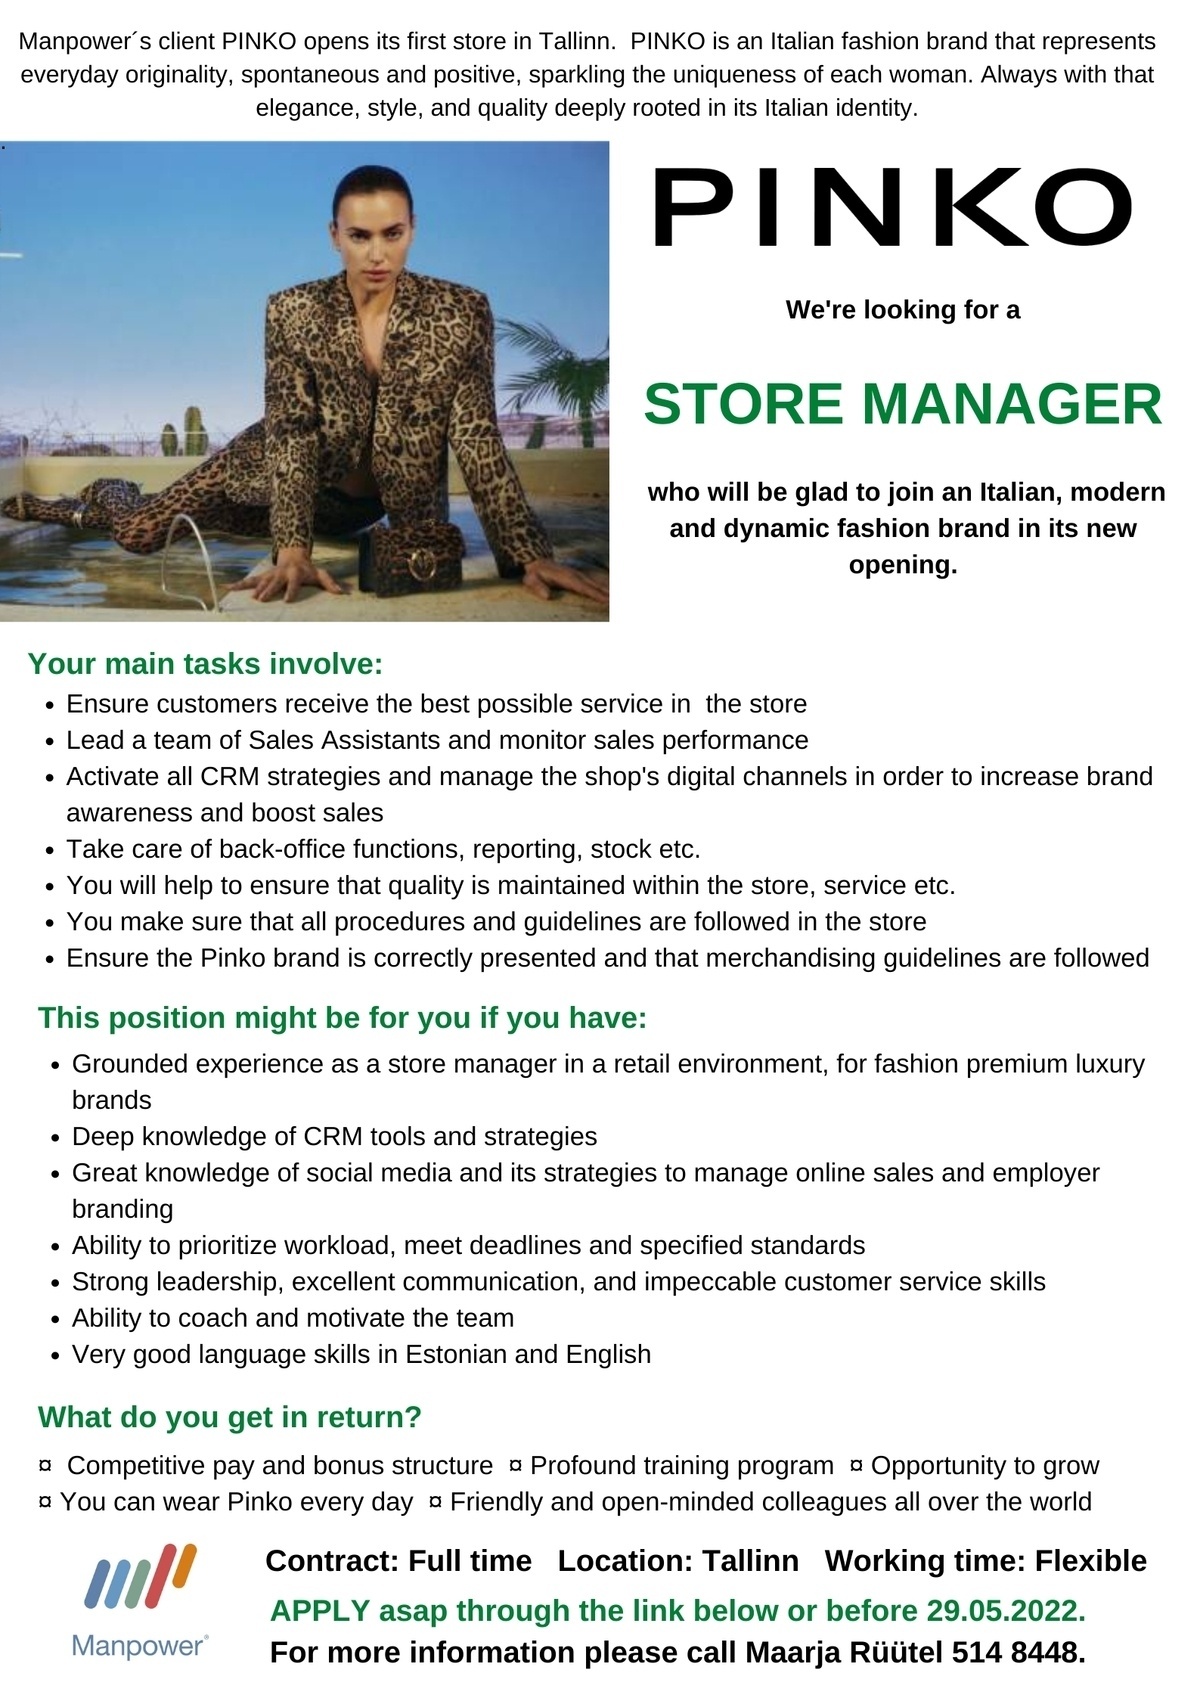 Manpower OÜ STORE MANAGER